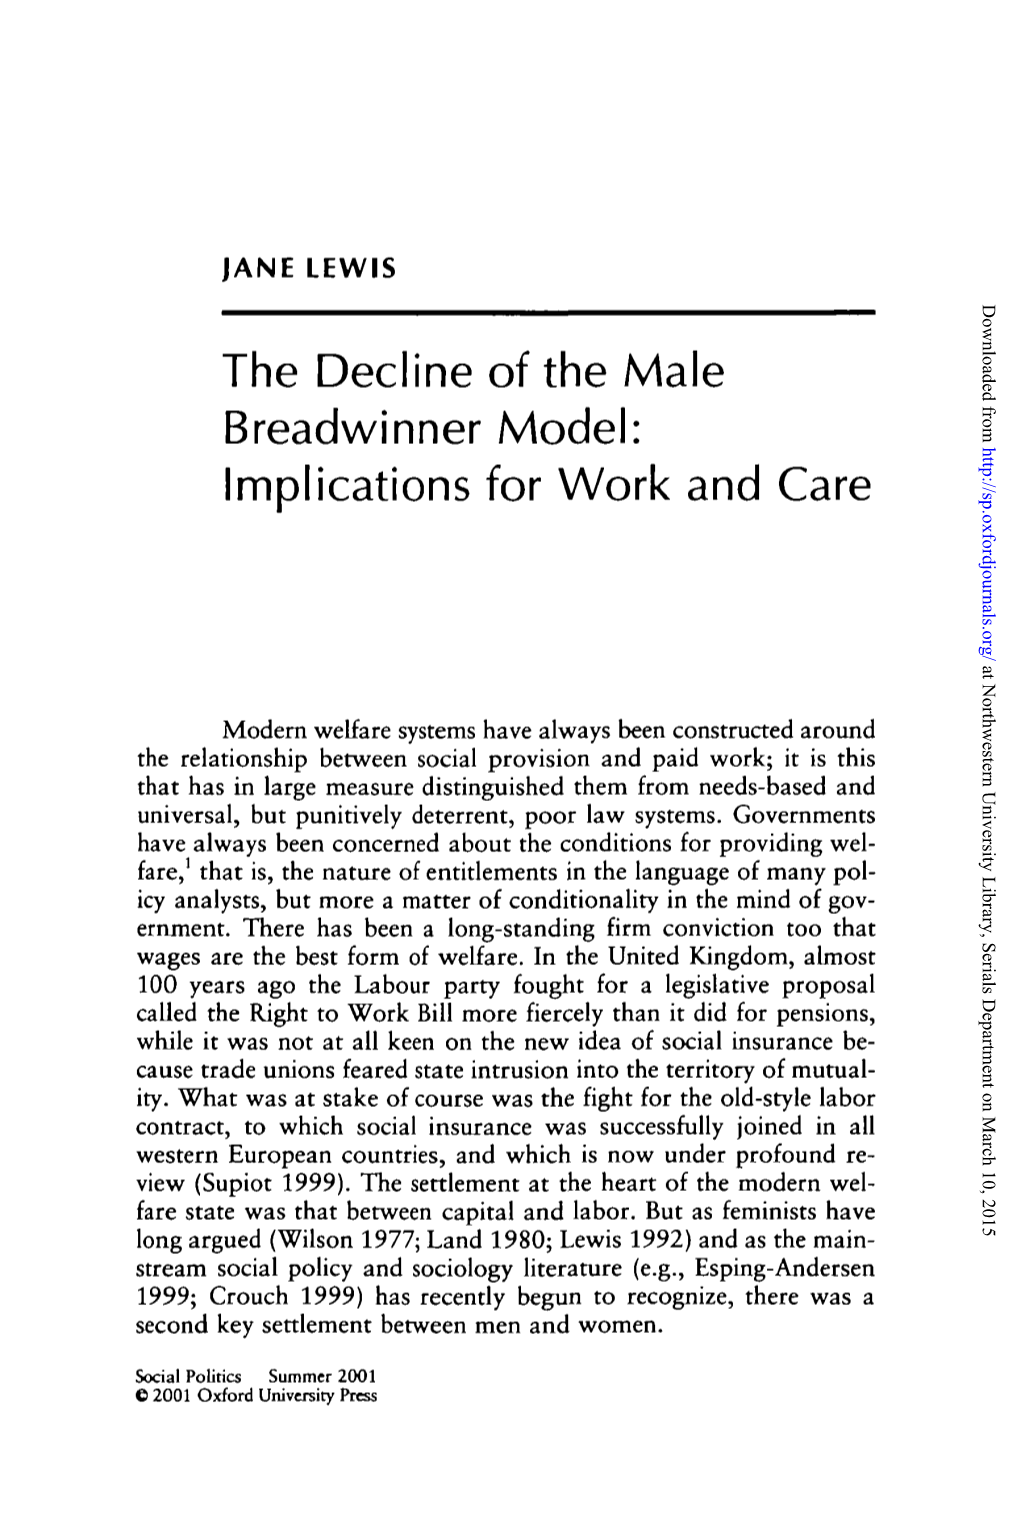 The Decline of the Male Breadwinner Model: Implications for Work and Care